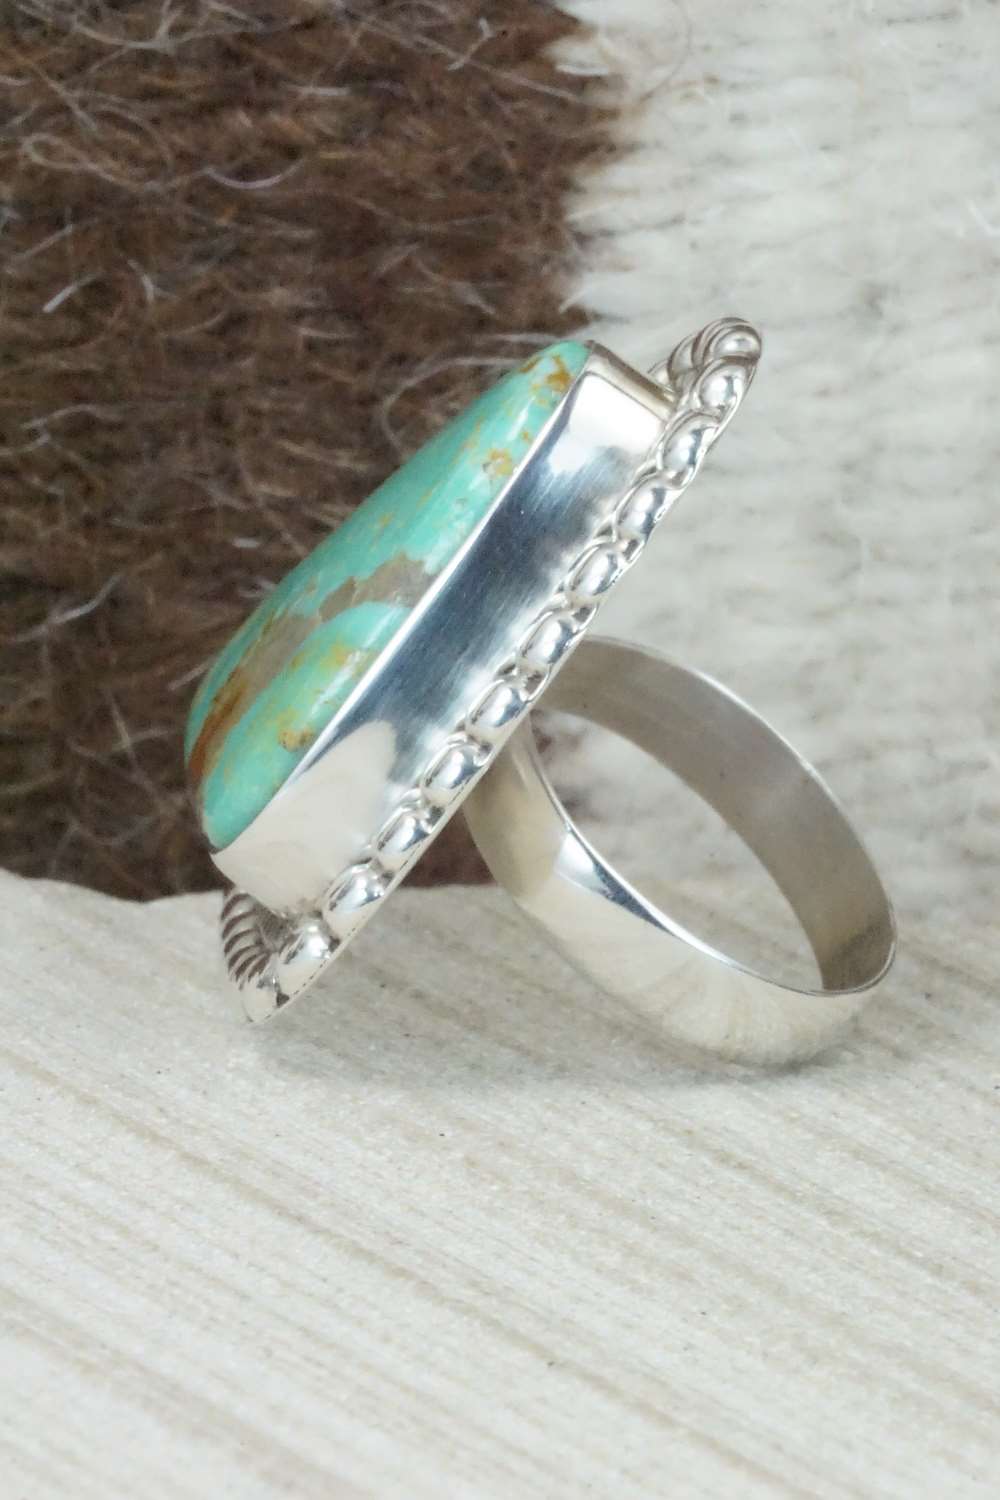 Turquoise & Sterling Silver Ring - Herbert Cayatineto - Size 6.5